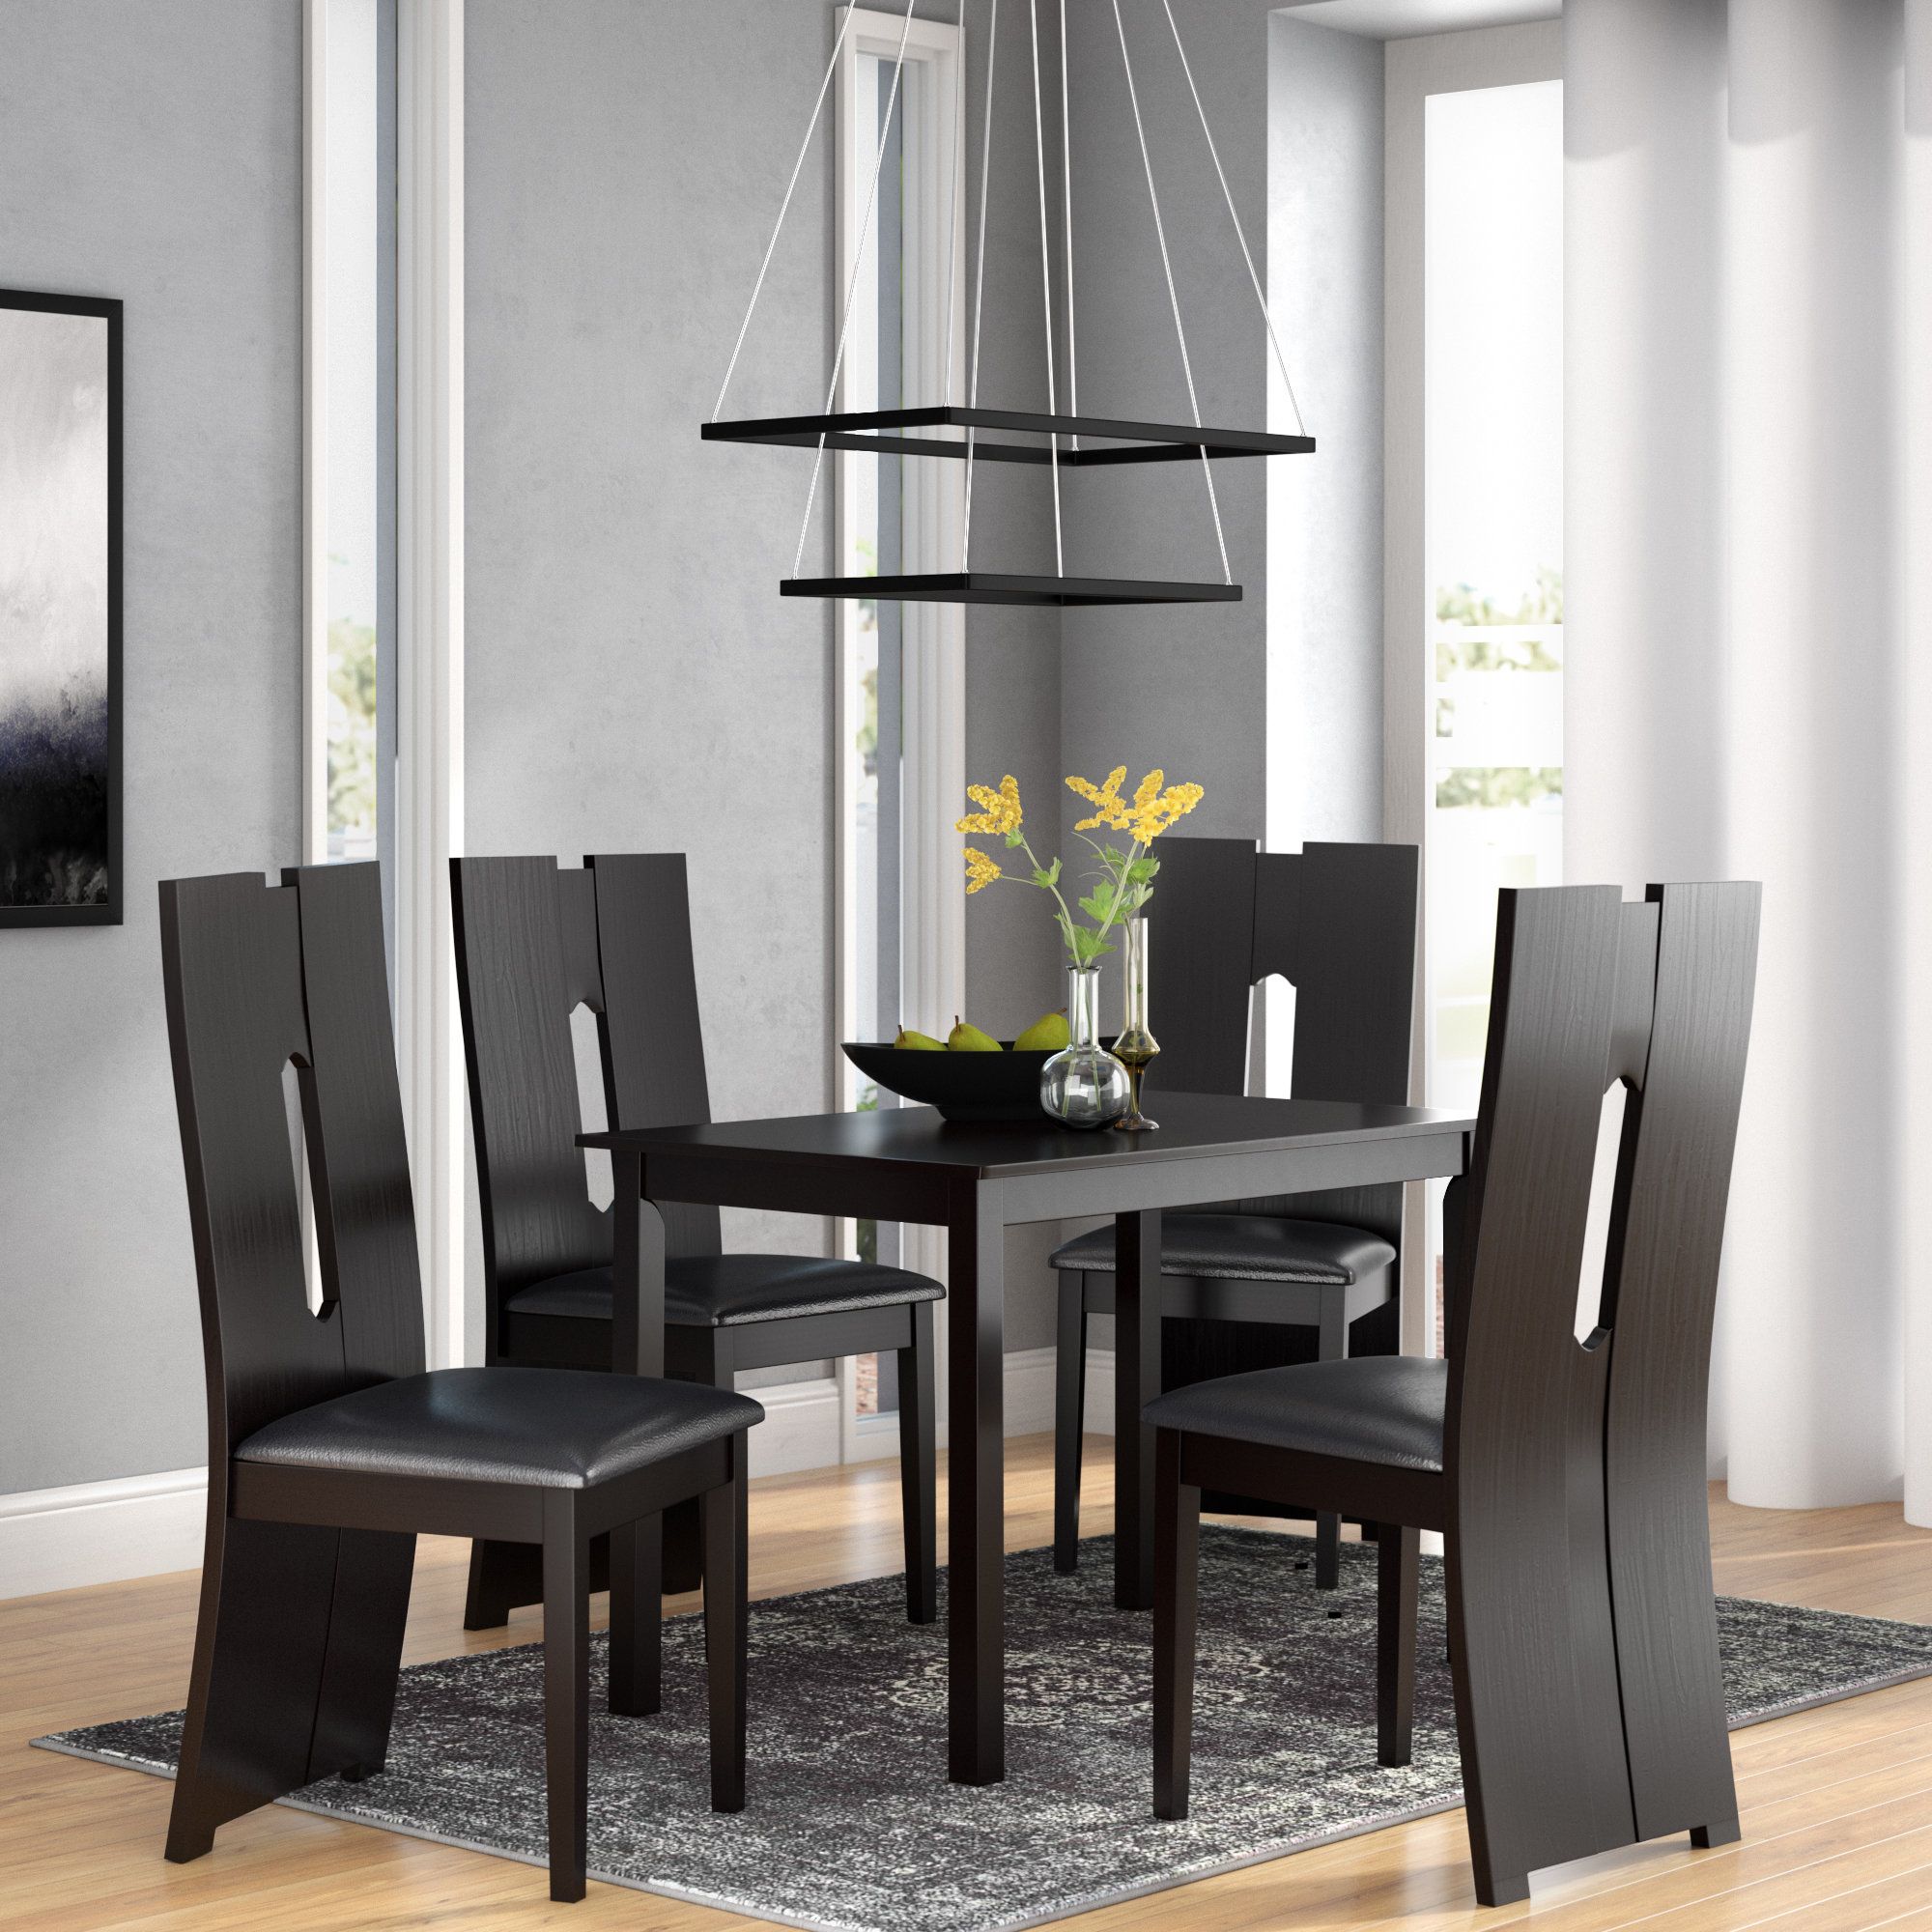 Most Current Orren Ellis Onsted Modern And Contemporary 5 Piece Breakfast Nook With Regard To Maynard 5 Piece Dining Sets (View 11 of 20)